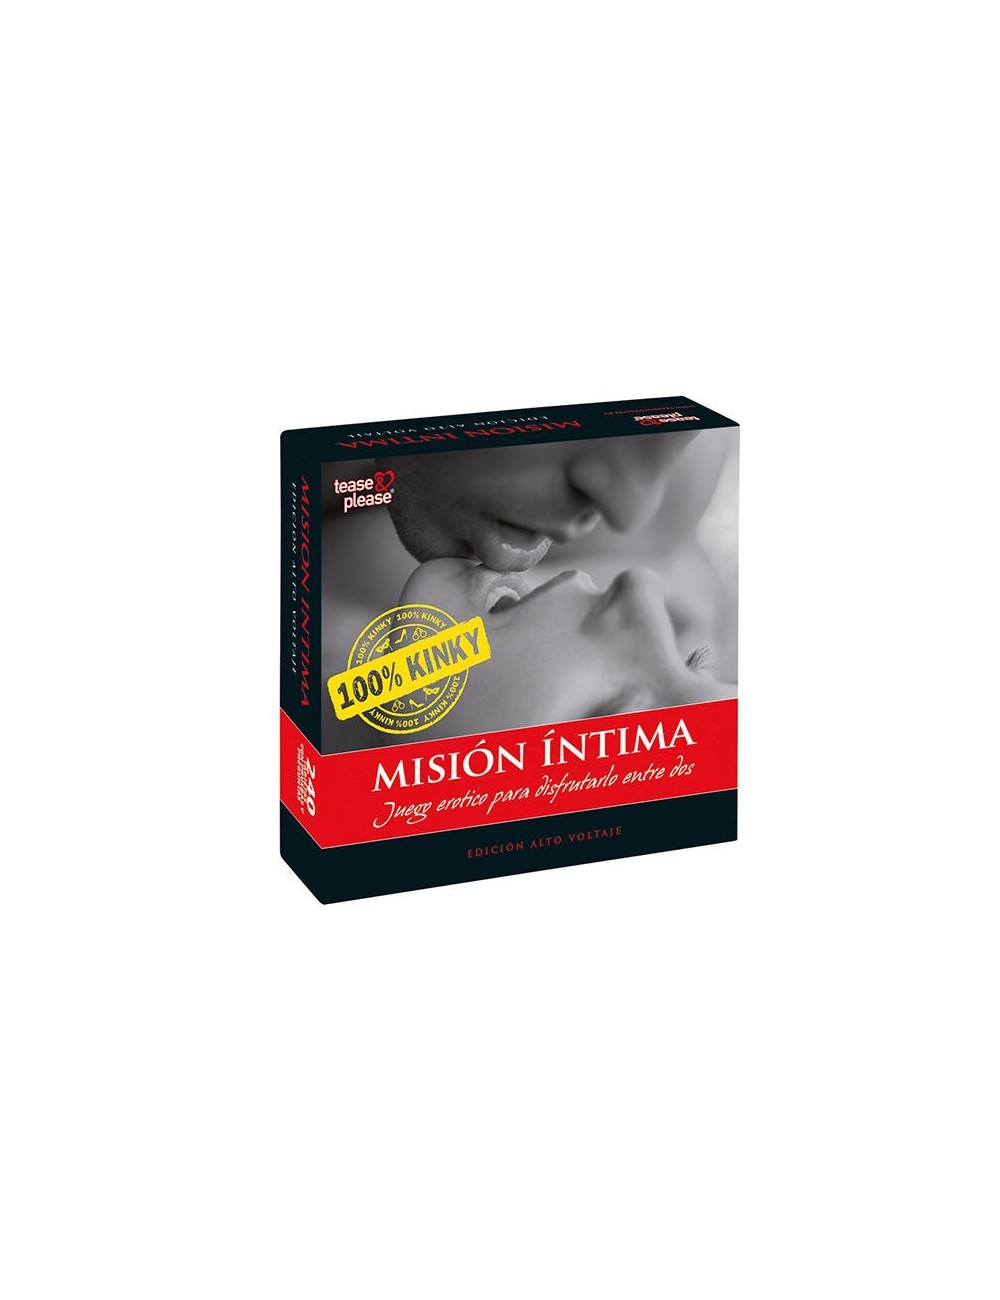 Sextoys - Jeux coquins - MISSION INTIME 100% KINKY (ES) - Tease&please